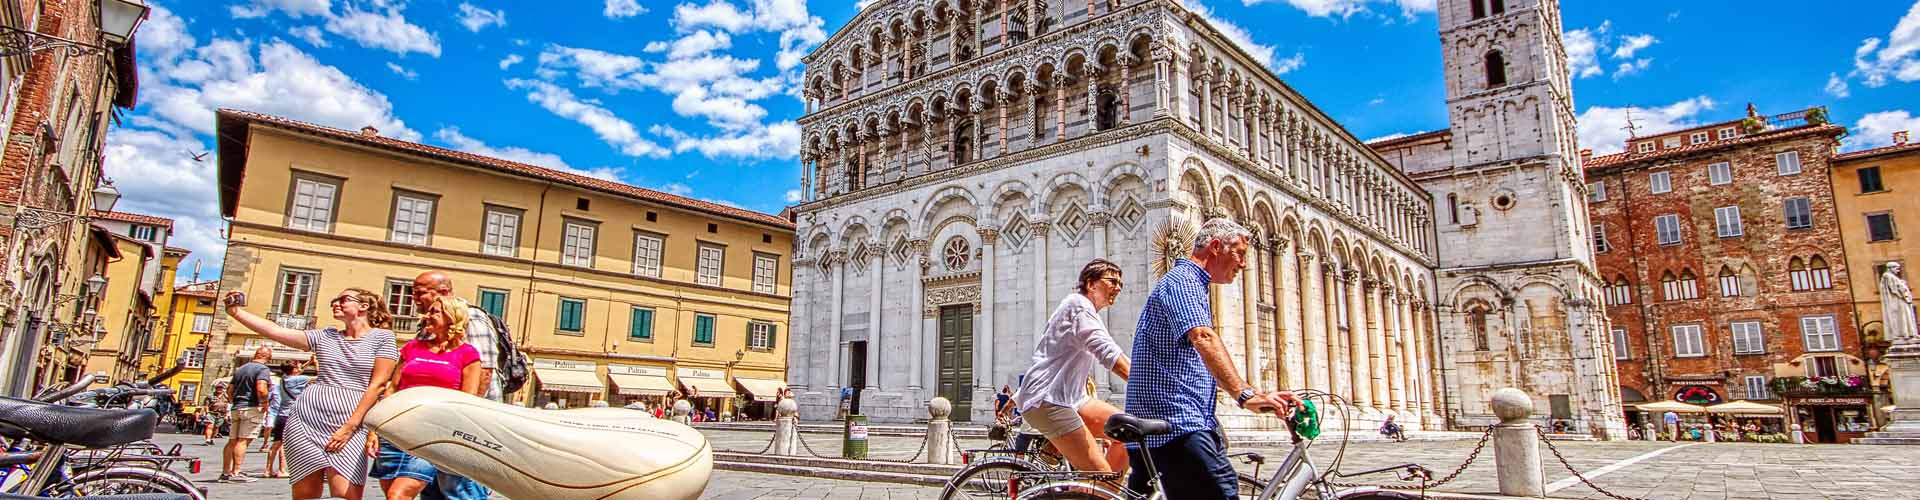 Our 10 Travel Destination Picks for 2022 | Trips 2 Italy